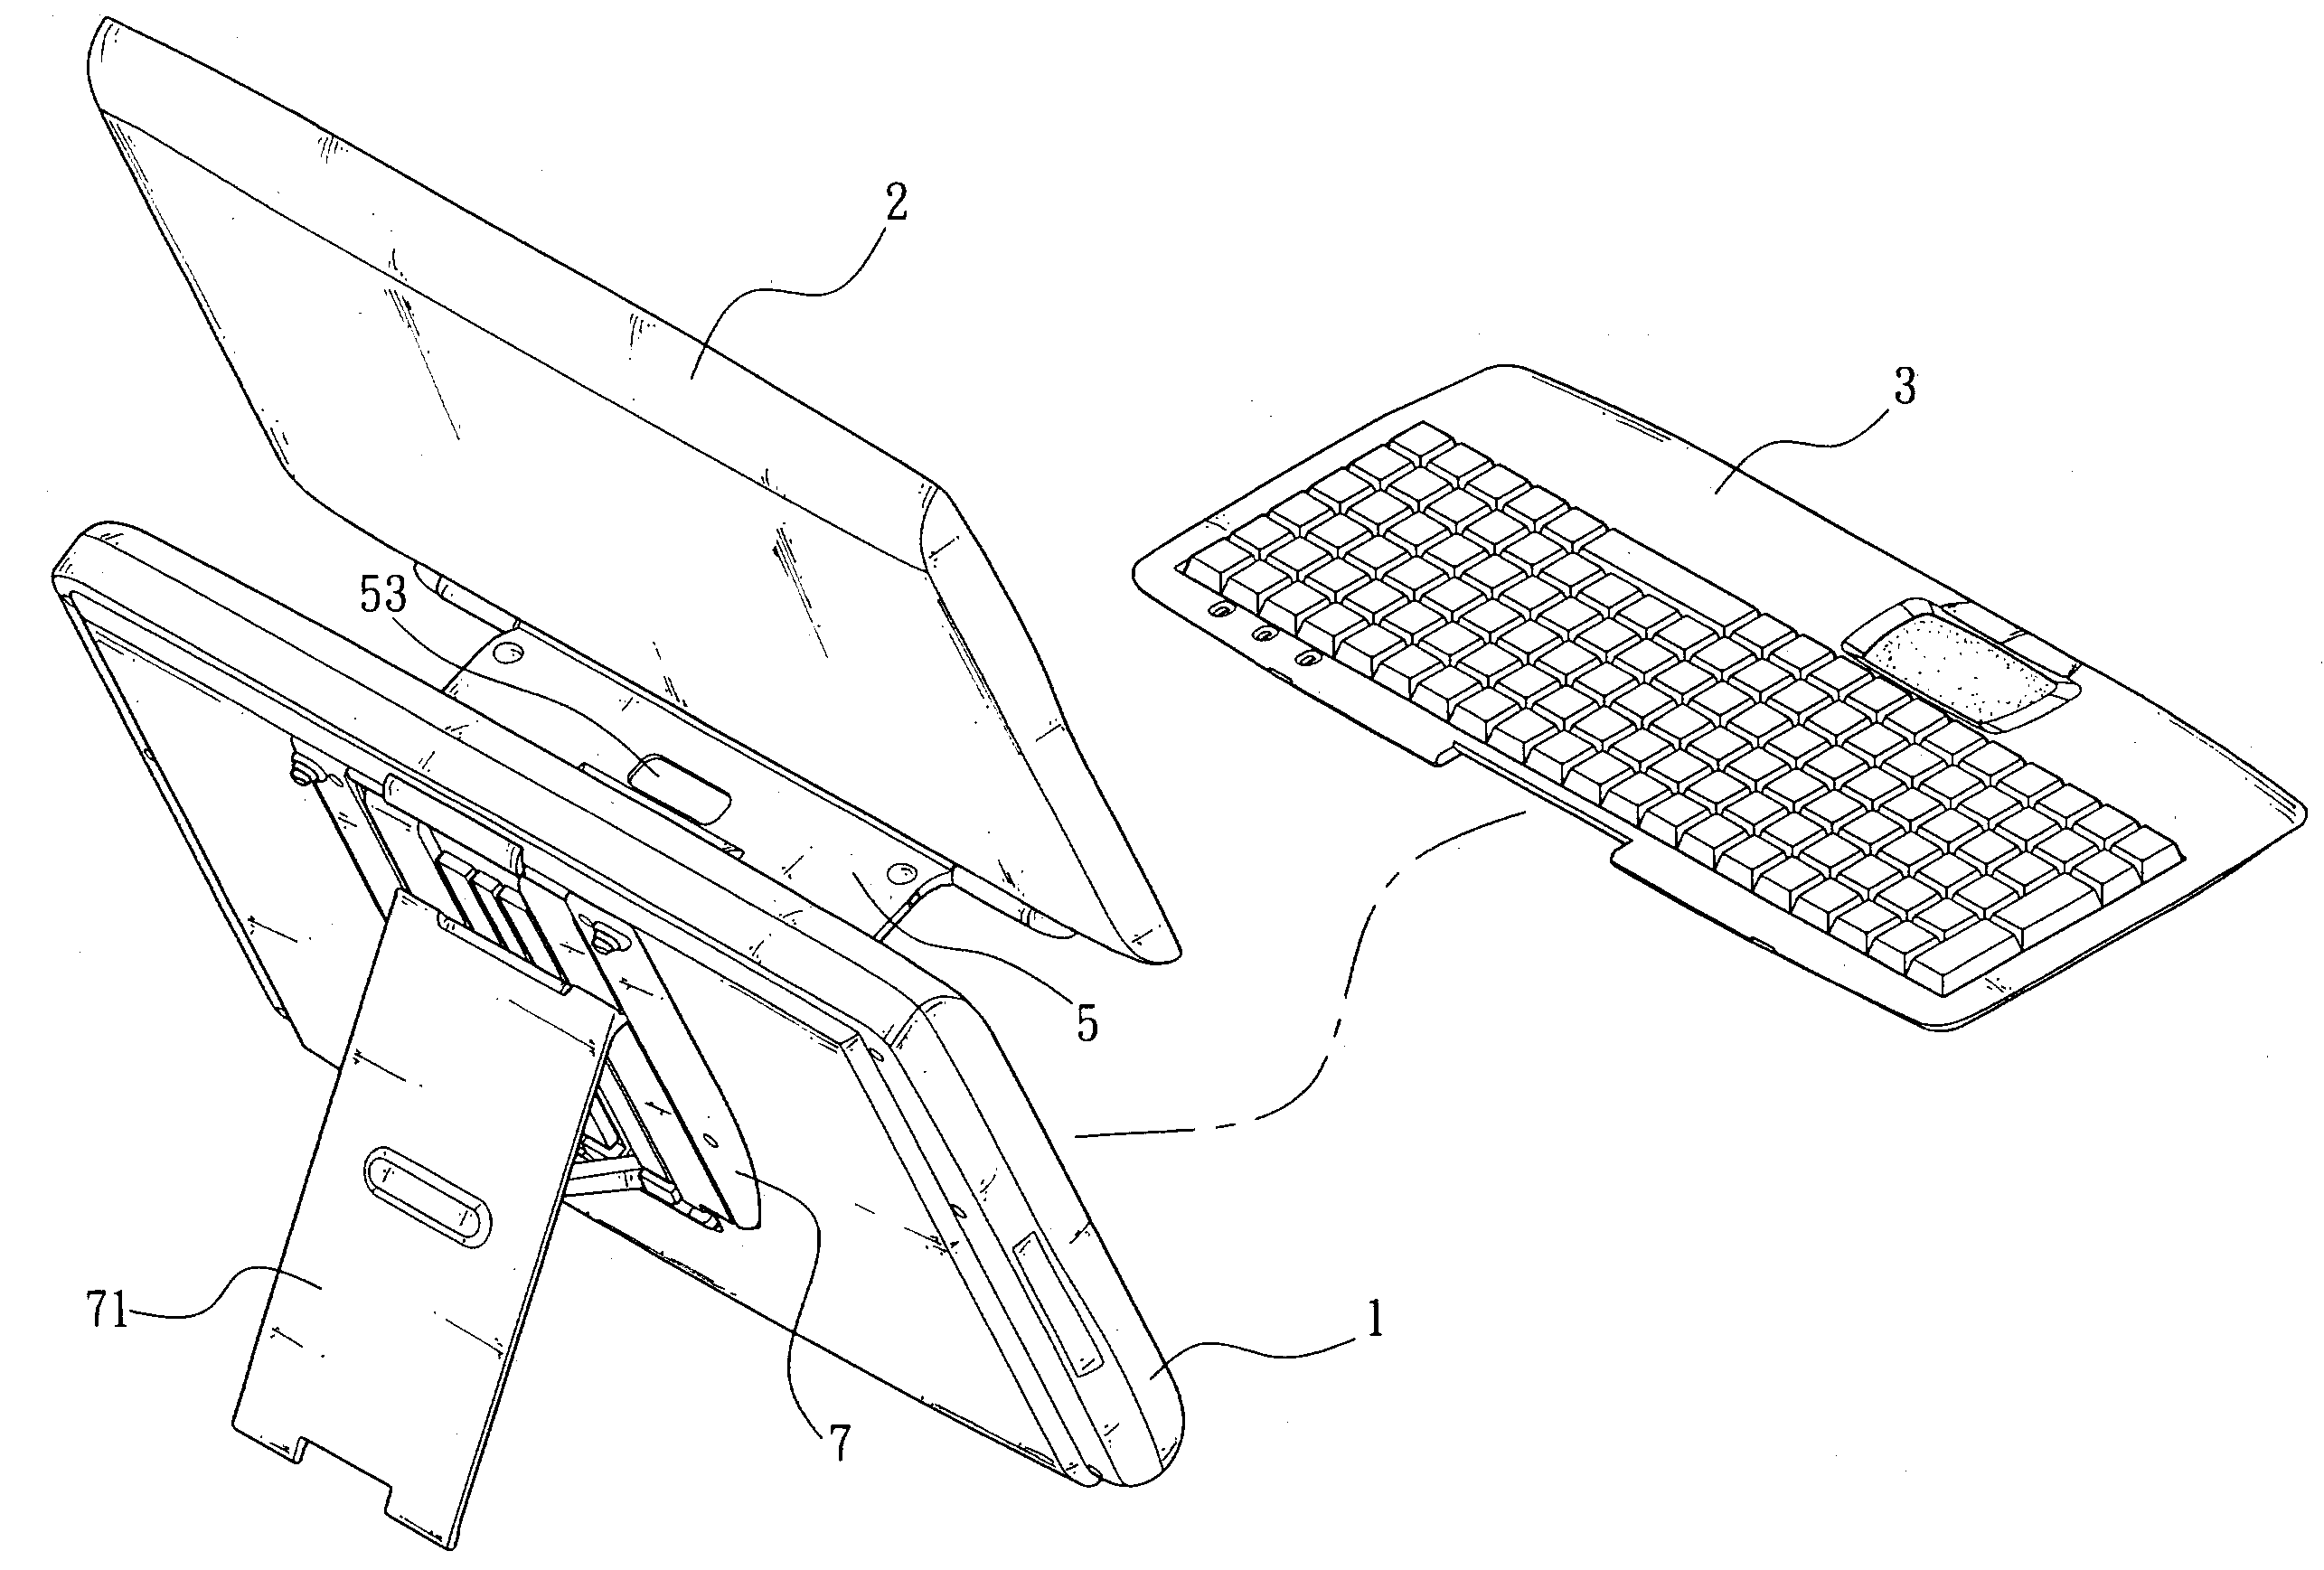 Structure of notebook computer